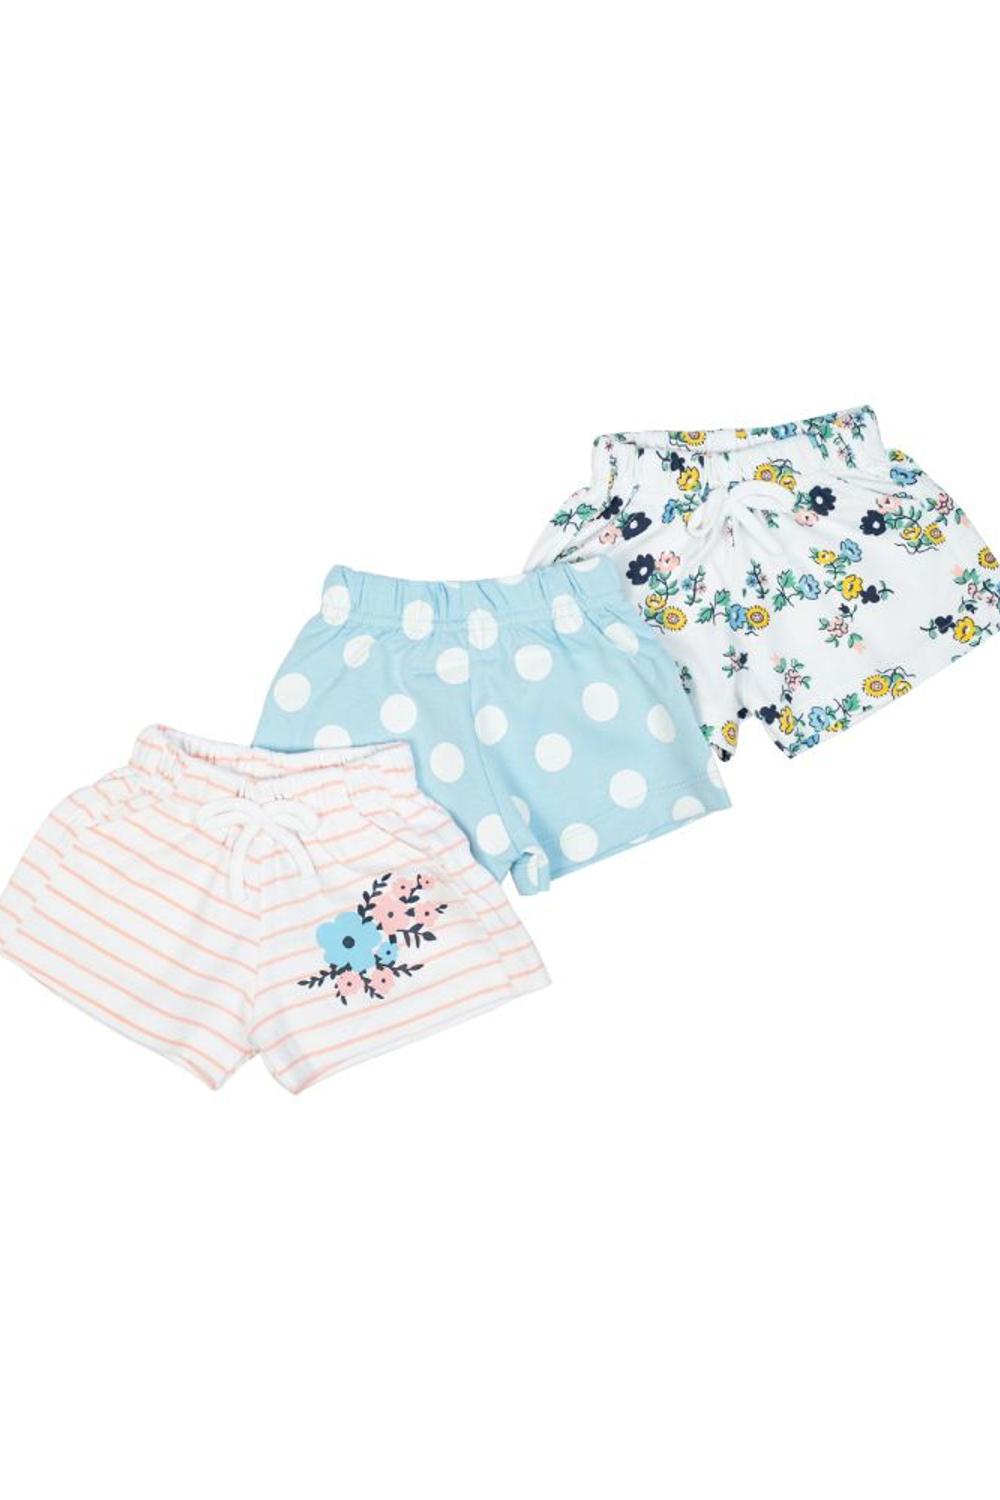 Mee Mee Baby Light Blue, White  Coral Shorts - Pack Of 3